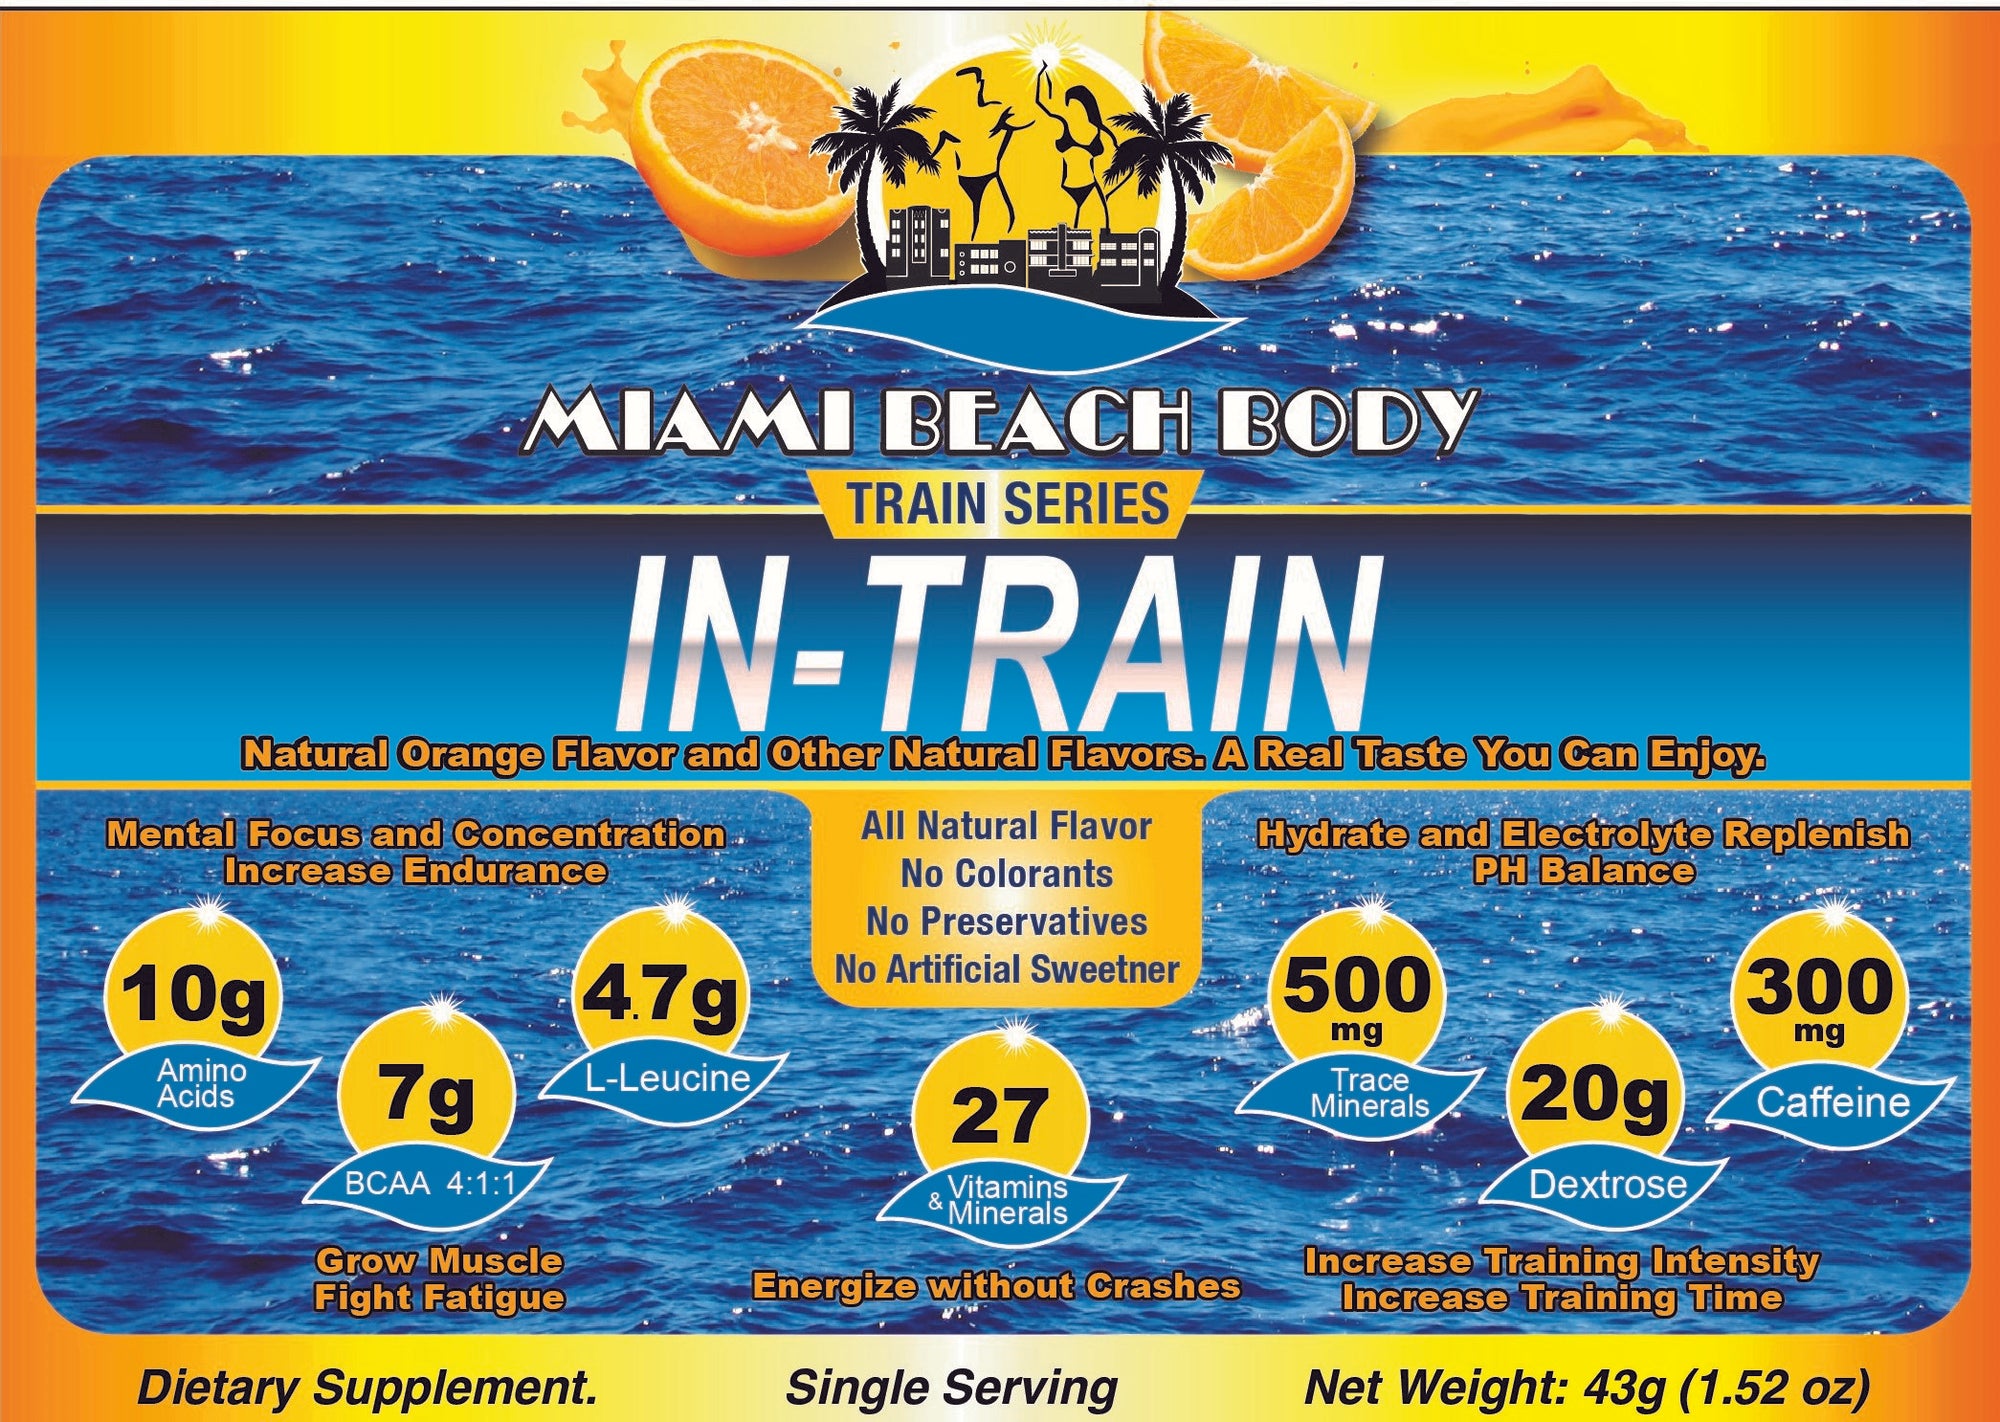 IN-TRAIN: The most advanced BCAA Intra-Workout Formulation of all Vitamins, Minerals, Trace Minerals, Aminoacids, and Other Natural Ingredients